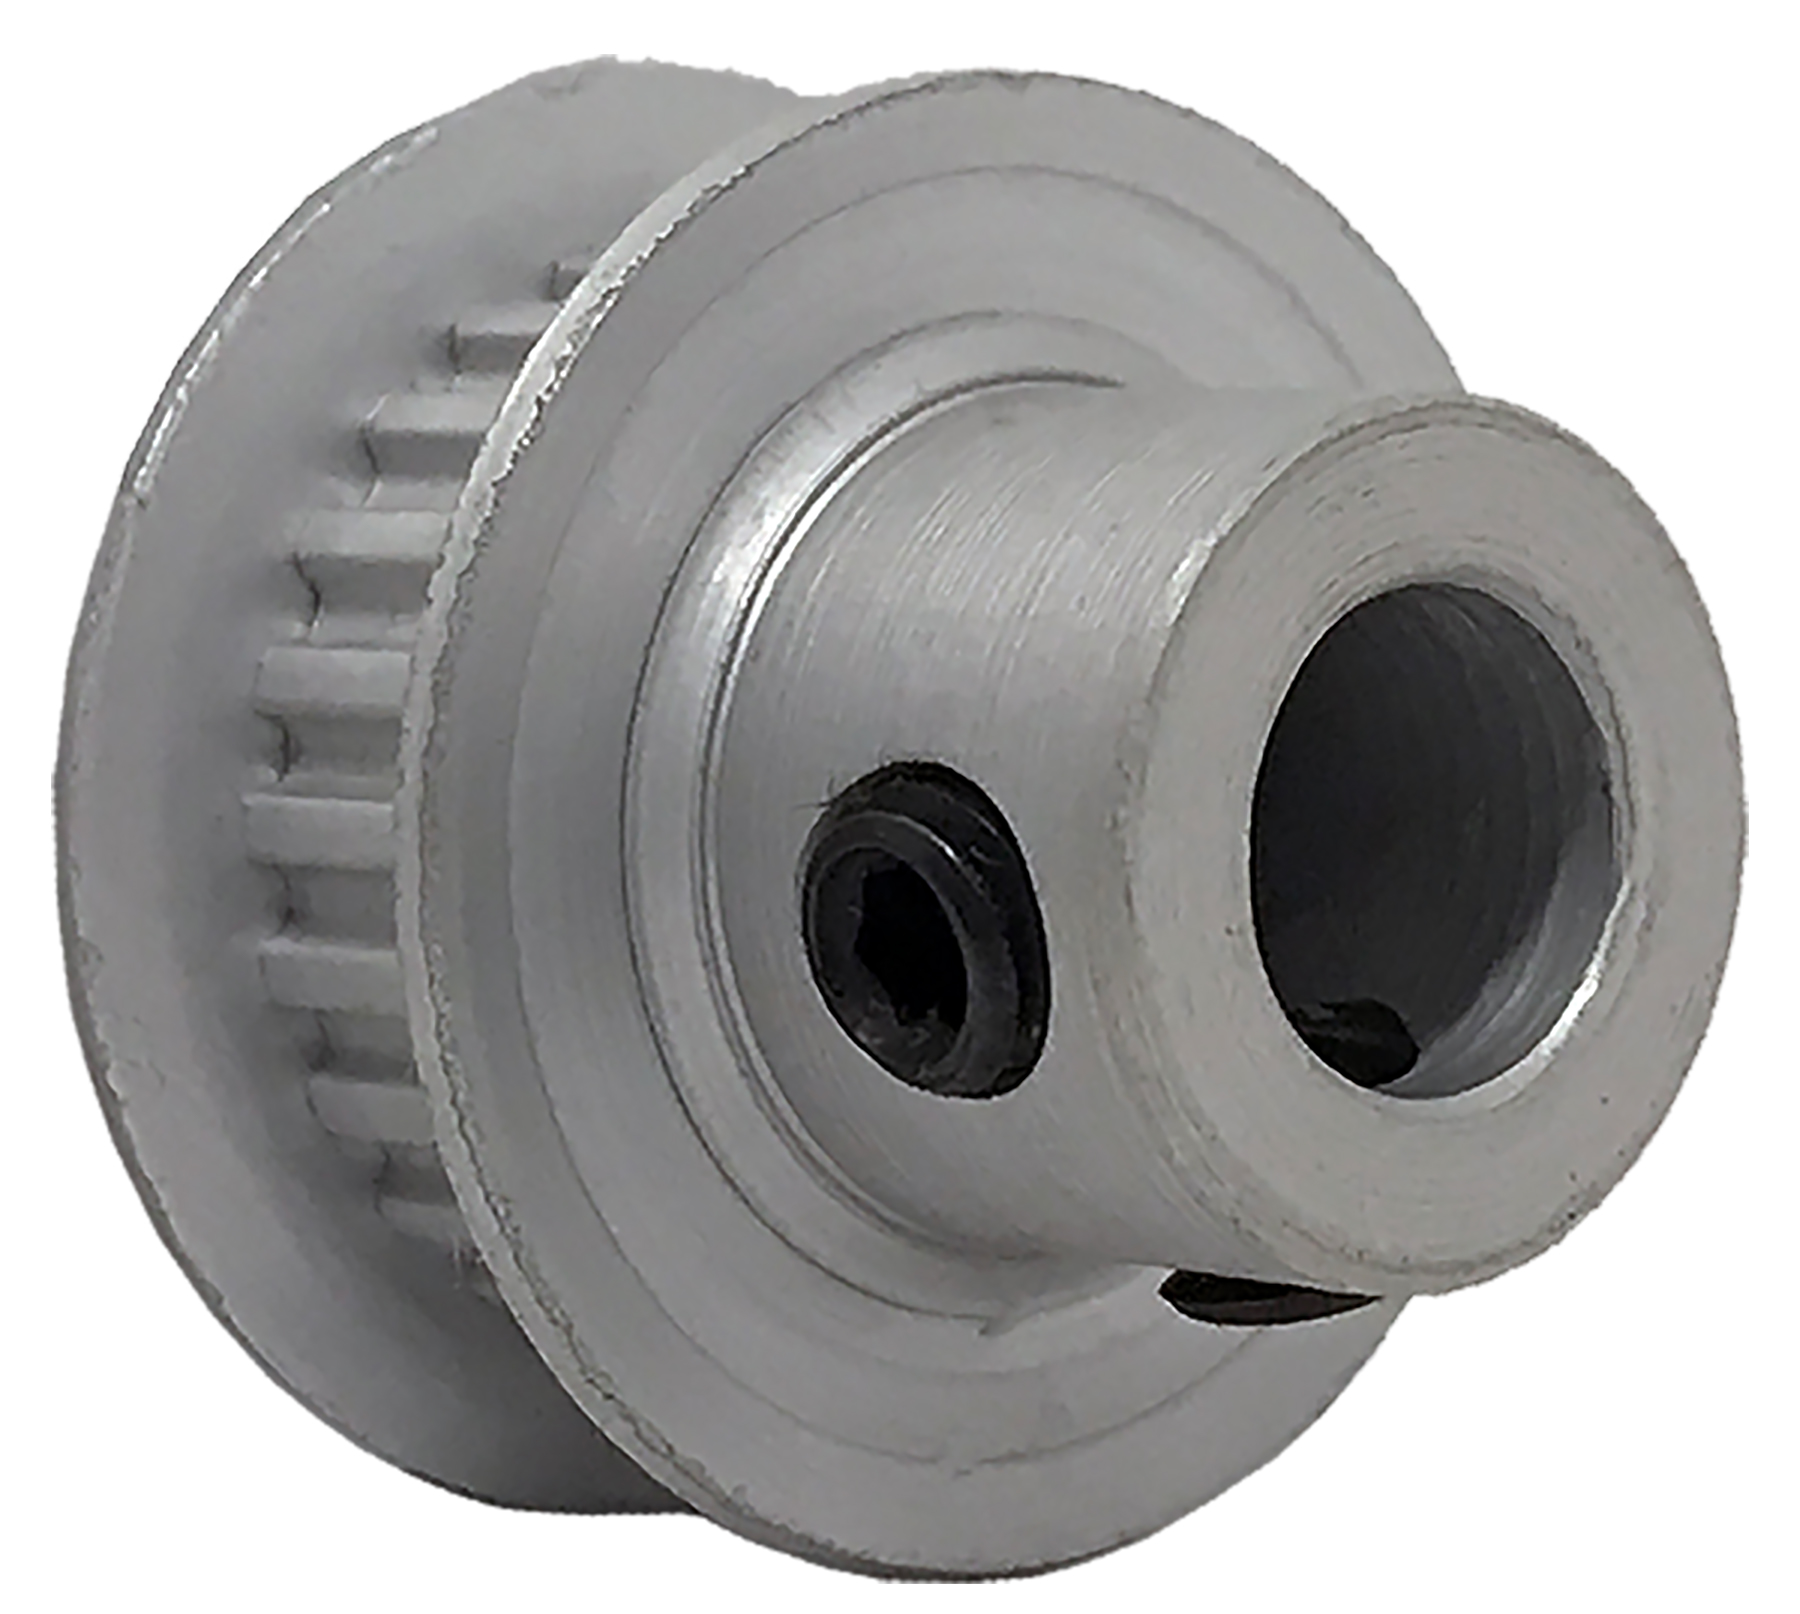 24LT187-6FA3 - Aluminum Imperial Pitch Pulleys